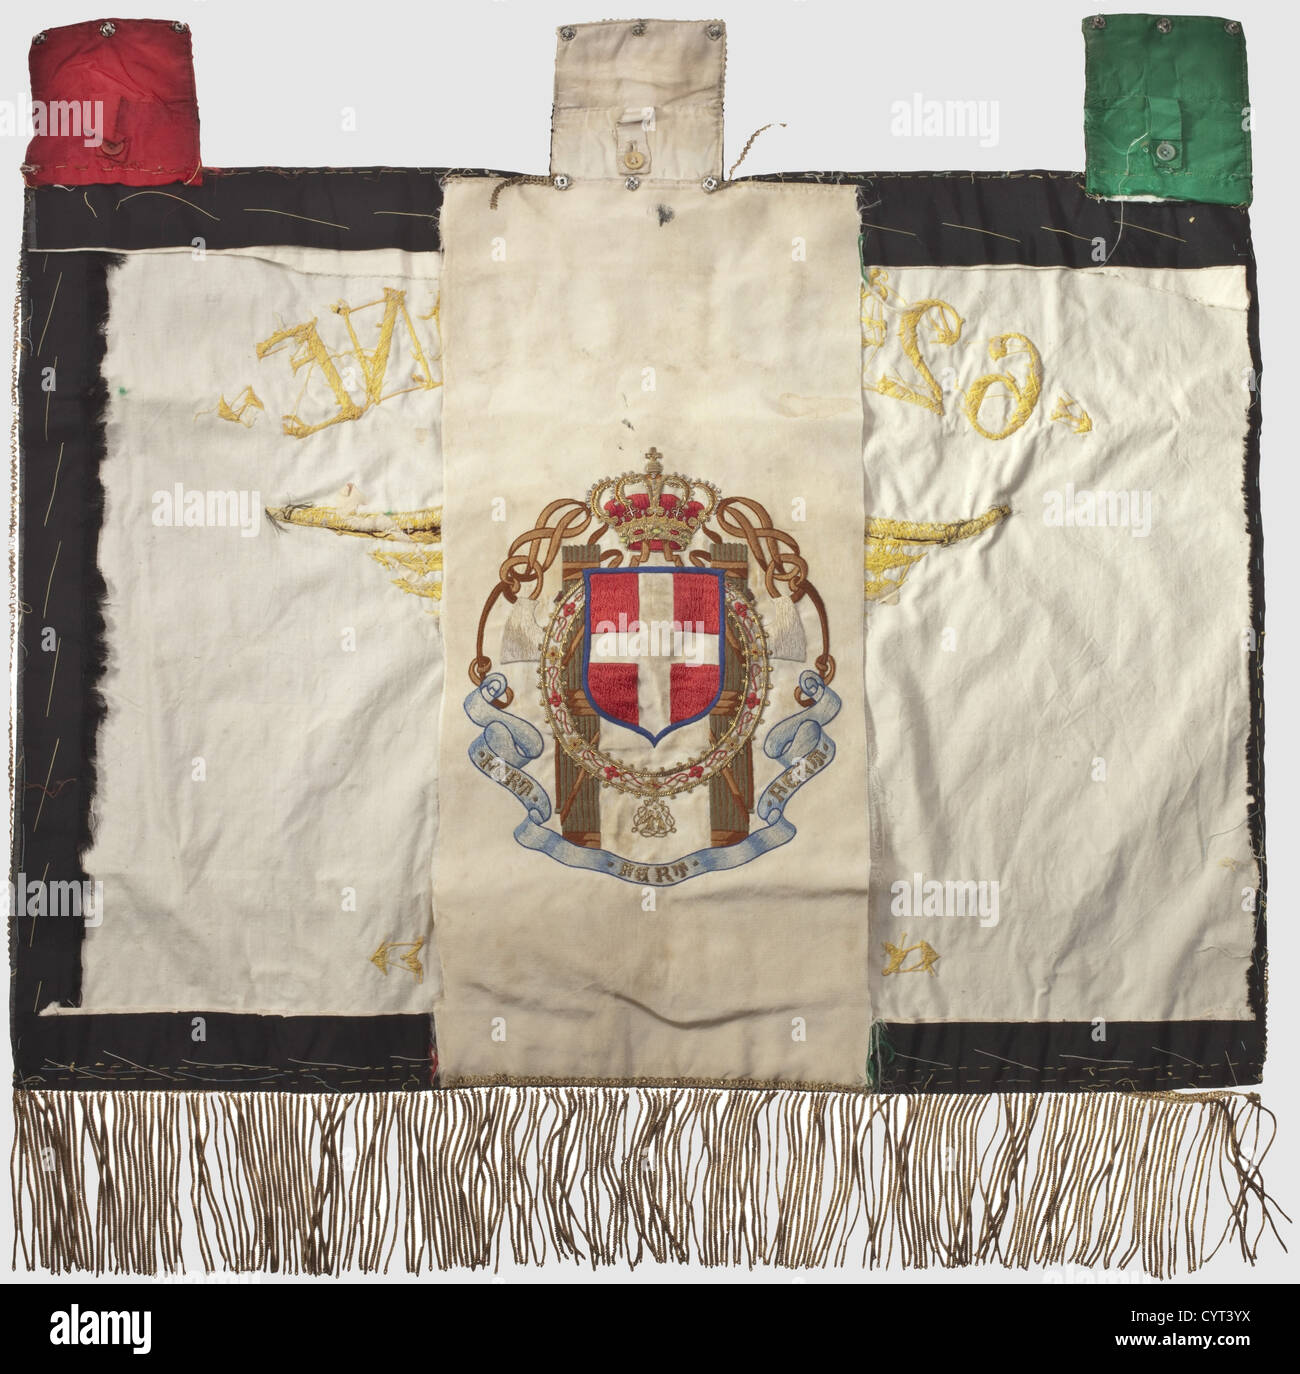 An Italian MVSN Black Shirt Banner,for the 62nd 'Isonzo' Legion The front is of black standart cloth displaying '62 LEGIONE ISONZO' and the eagle with a lictor's bundle in heavy,elaborate gold embroidery.Unfortunately,there is only a fragment of the back with the Italian royal arms available.Gold fringe on the bottom.Size 67 x60 cm.The 62nd 'Isonzo' Legion was based at Gormizia.Very rare standart for the fascist militia,unfortunately incomplete.Of extremely high quality.Because of the height of the Lyon embroidery,the large embroidered eagle is almo,Additional-Rights-Clearences-Not Available Stock Photo